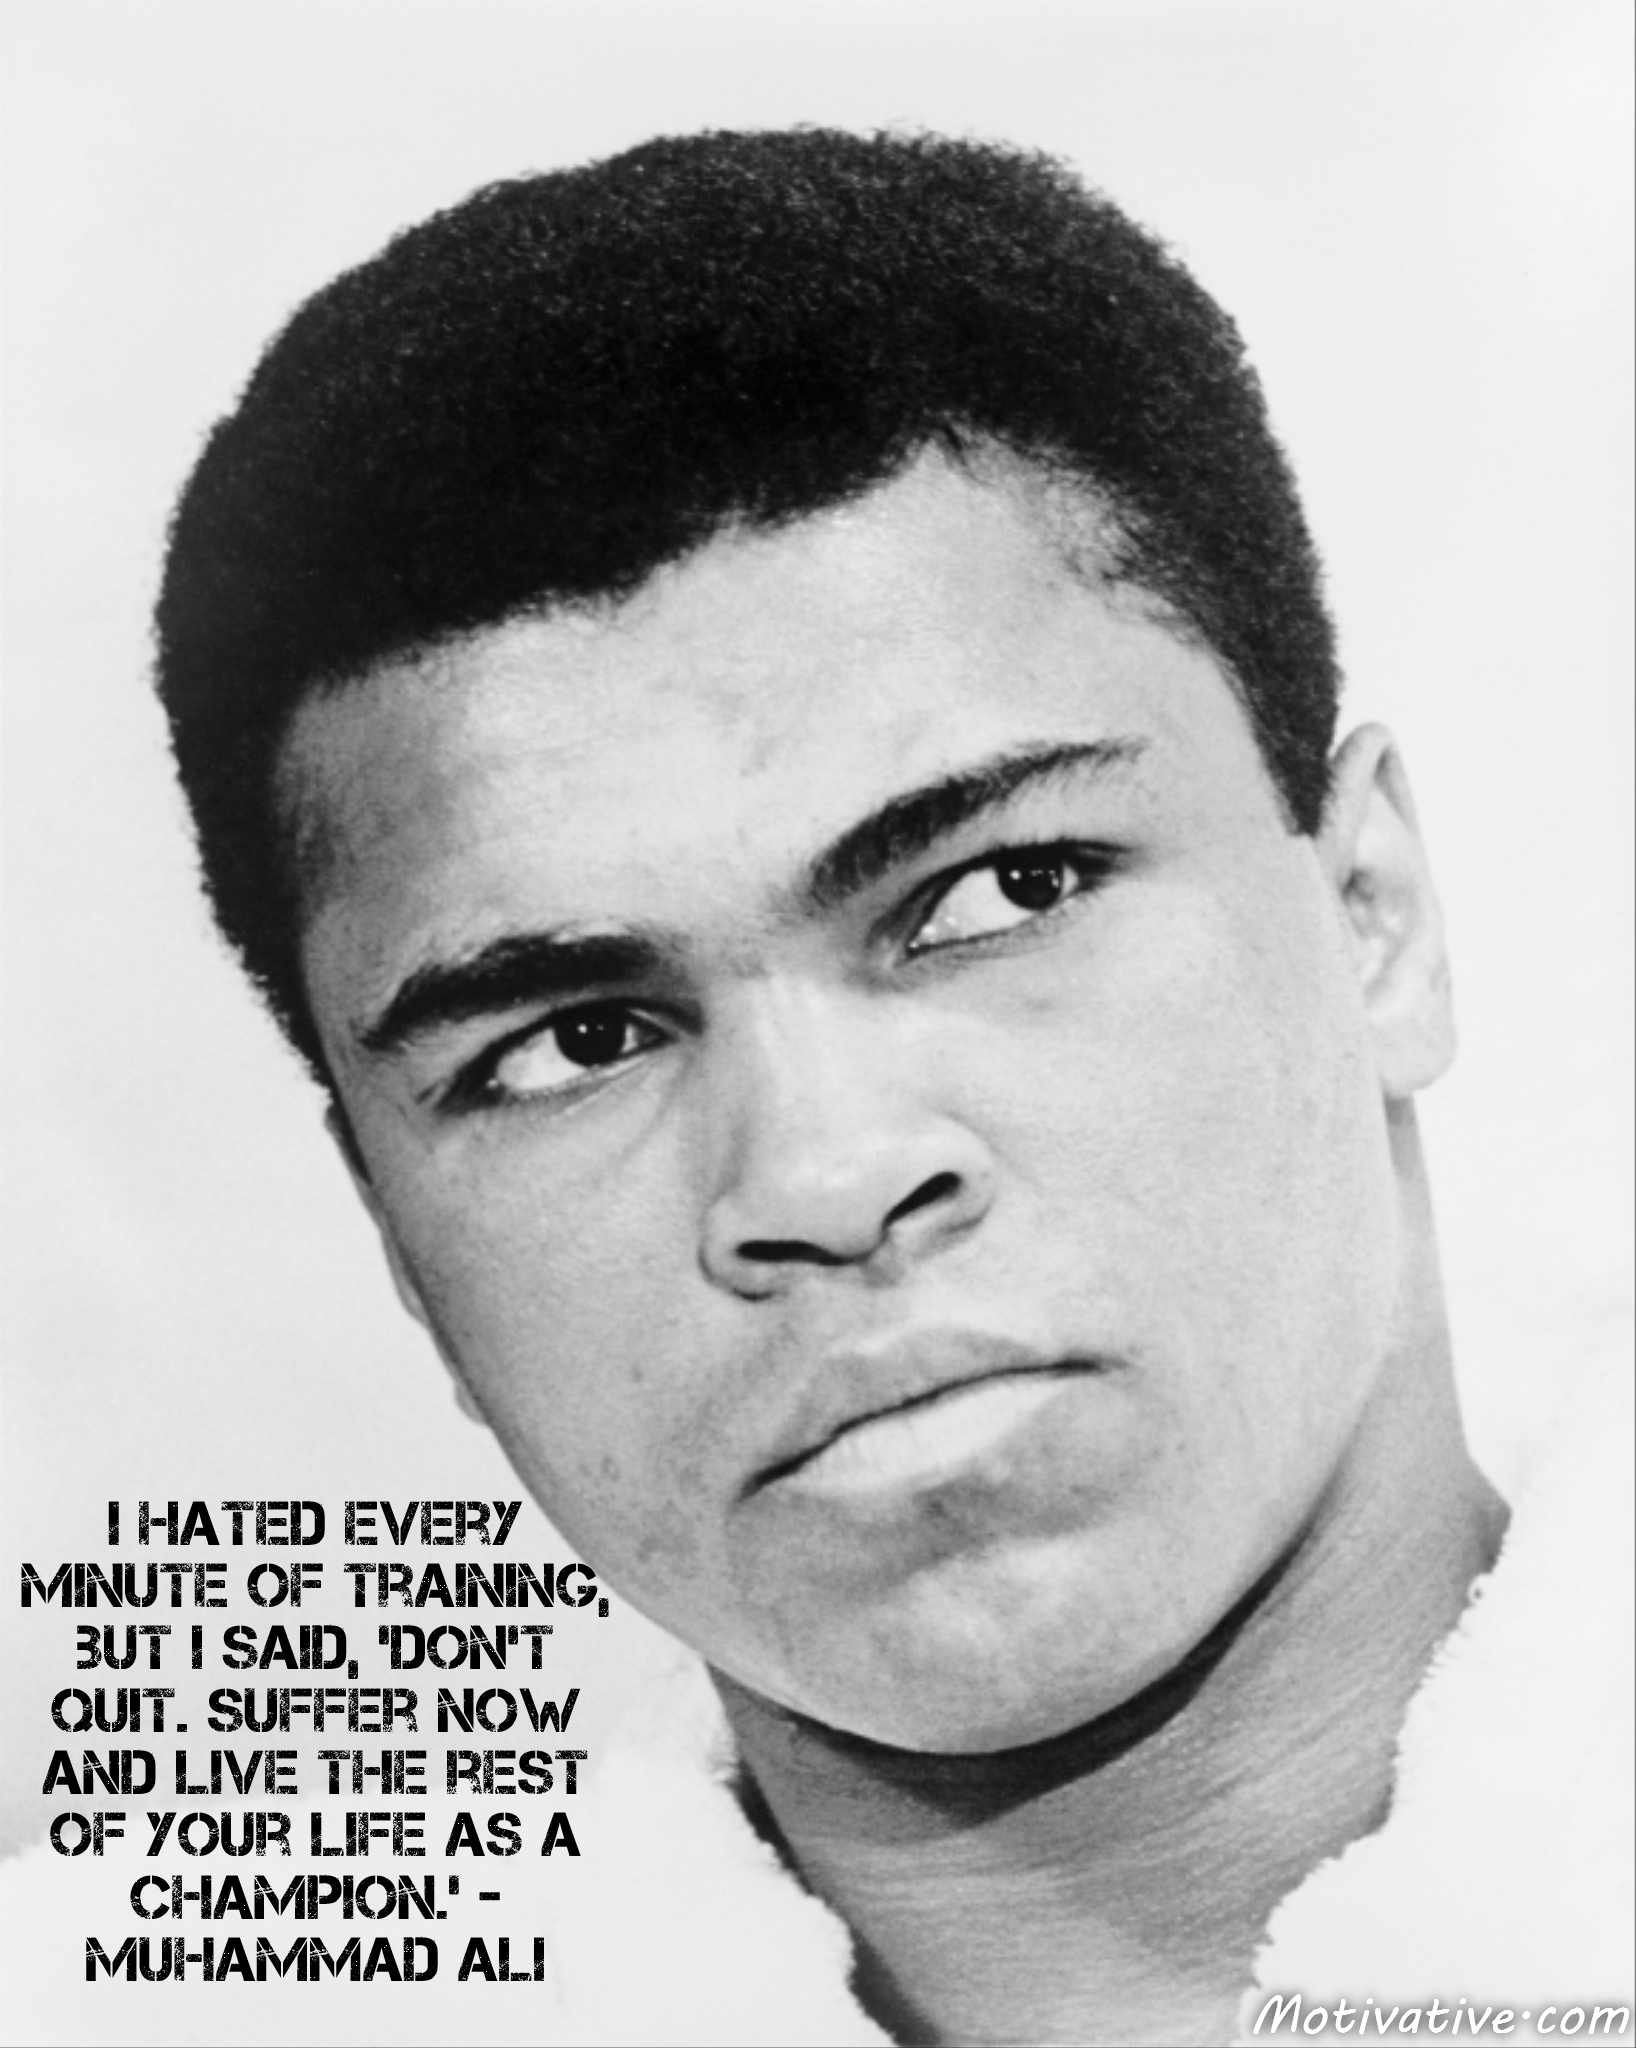 I hated every minute of training, but I said, ‘Don’t quit. Suffer now and live the rest of your life as a champion.’ – Muhammad Ali